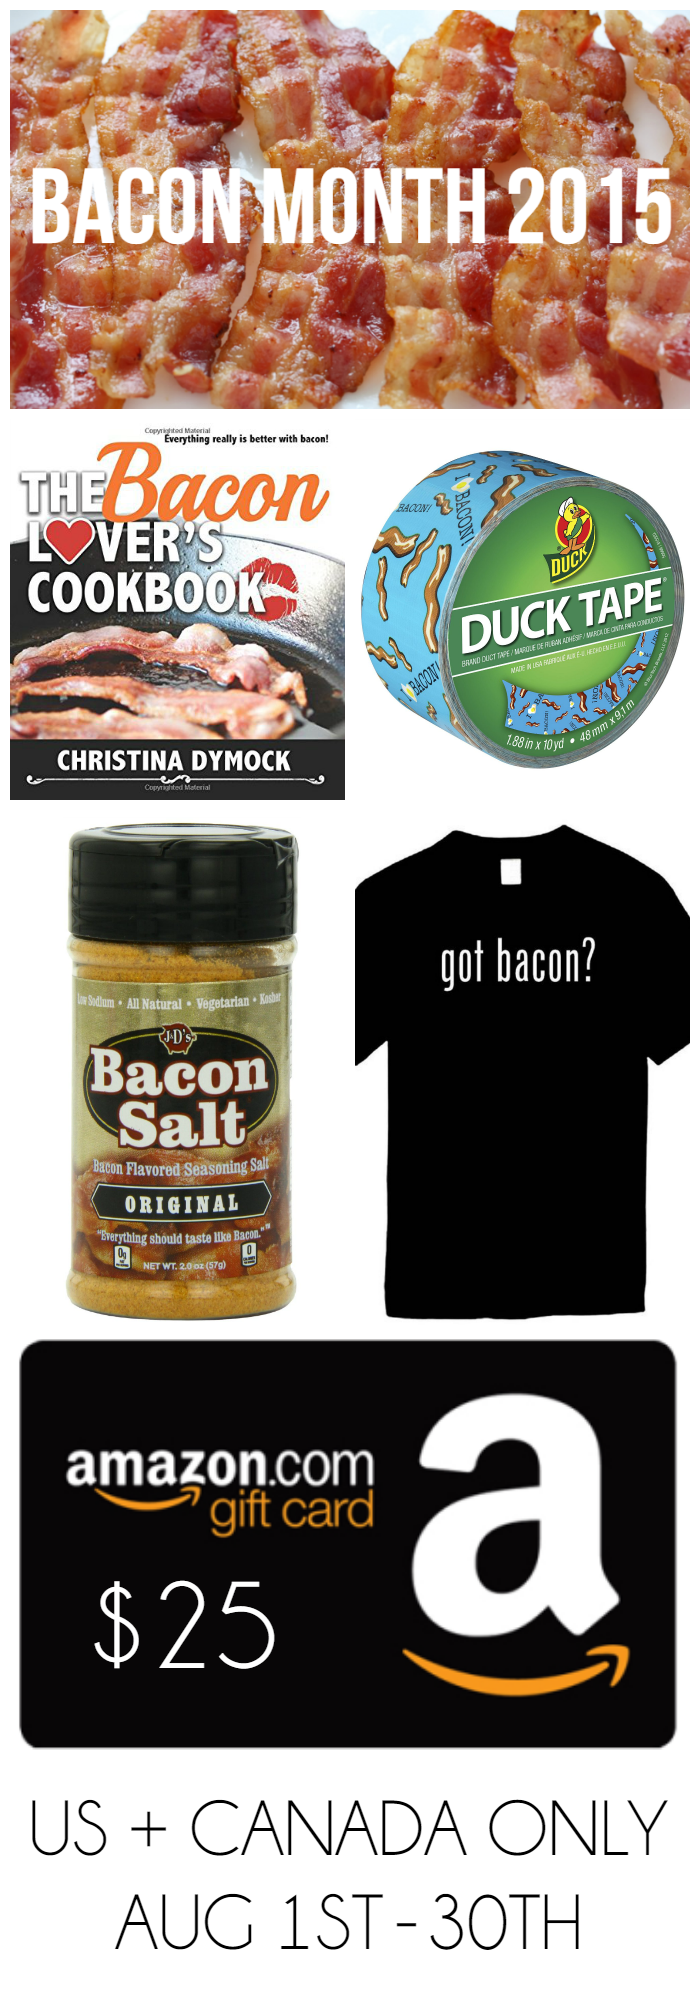 3rd Annual Bacon Month + Giveaway